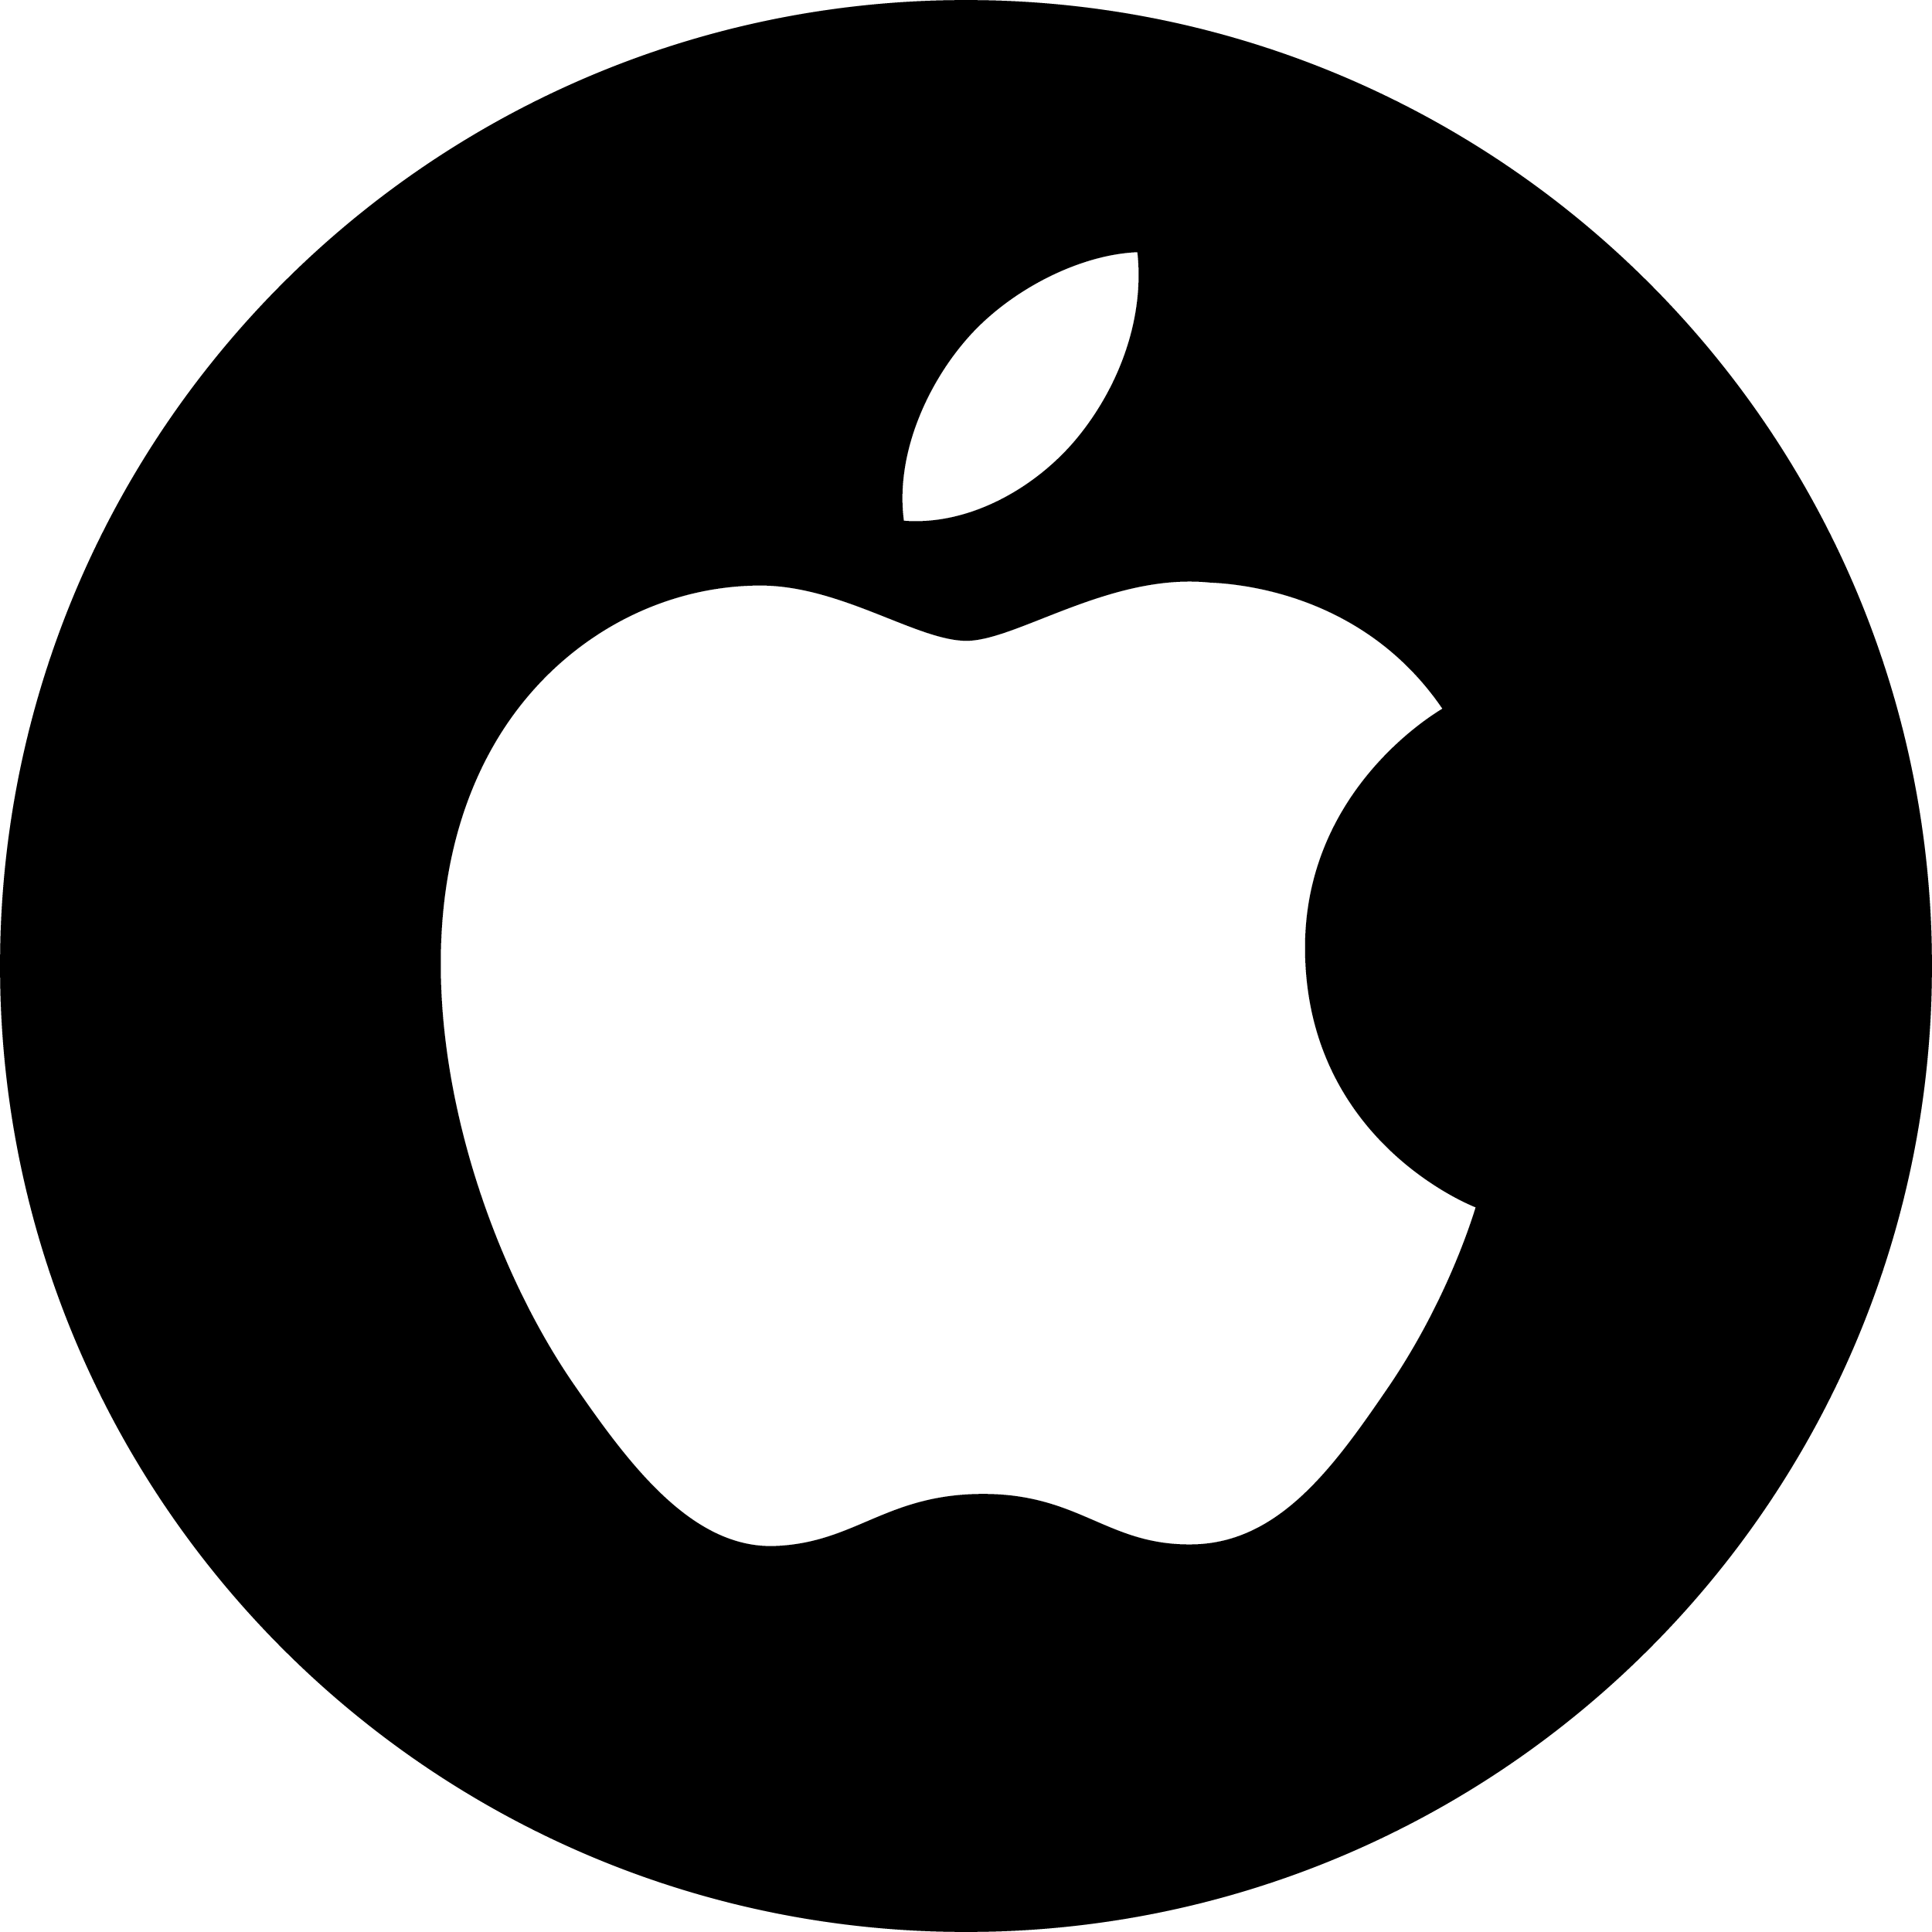 Download Apple-logo - Riot Chat Logo PNG Image with No Background ...